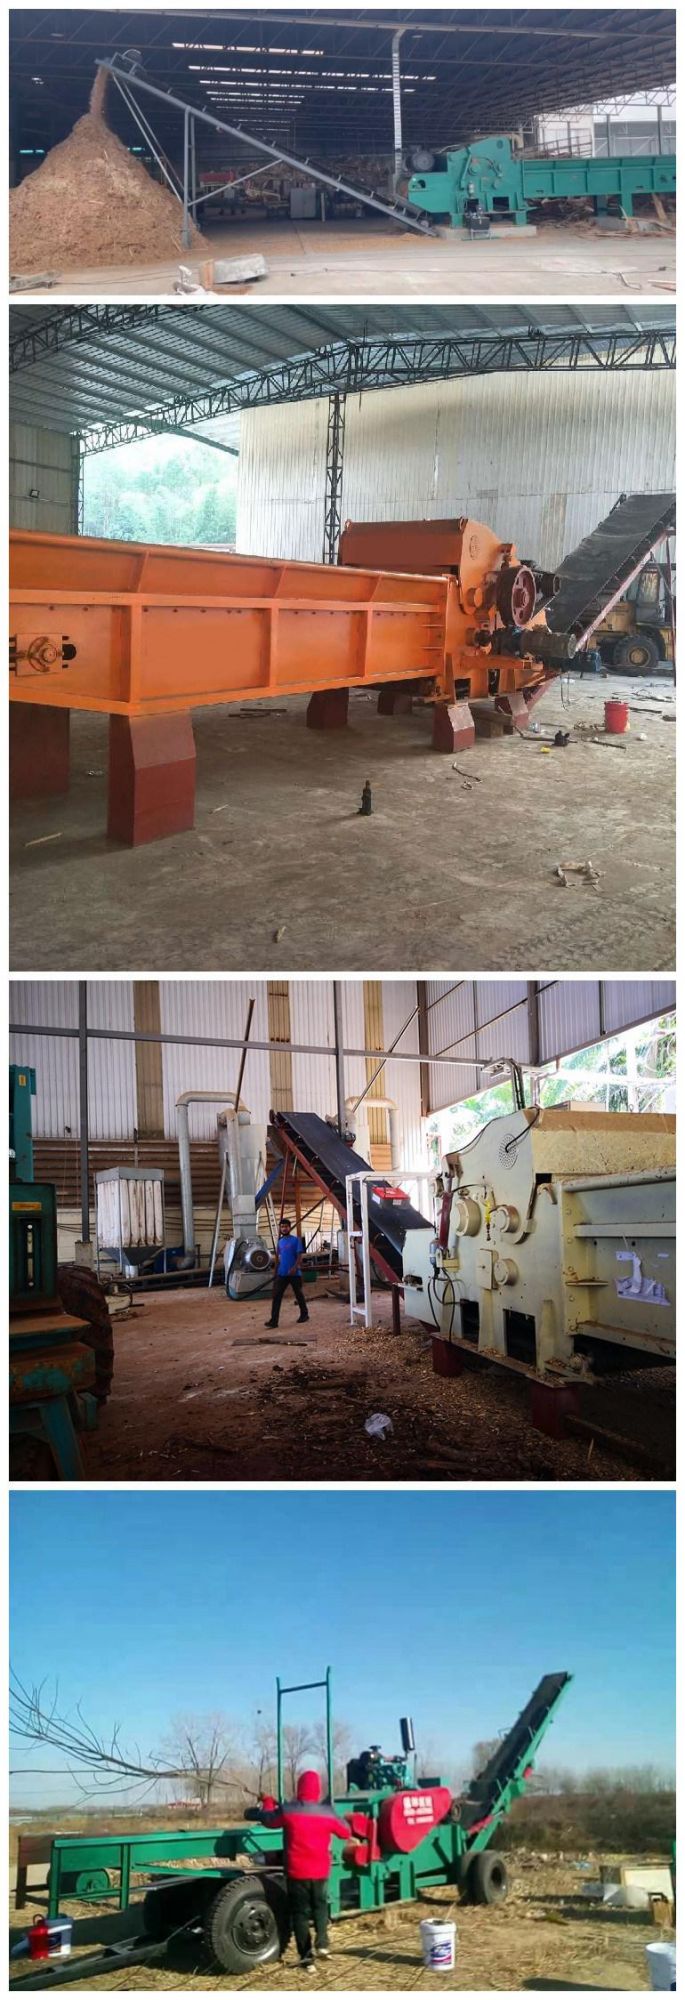 Shd Customized 350kw High Capacity Wood Chip Machine for Sale Wood Chipper